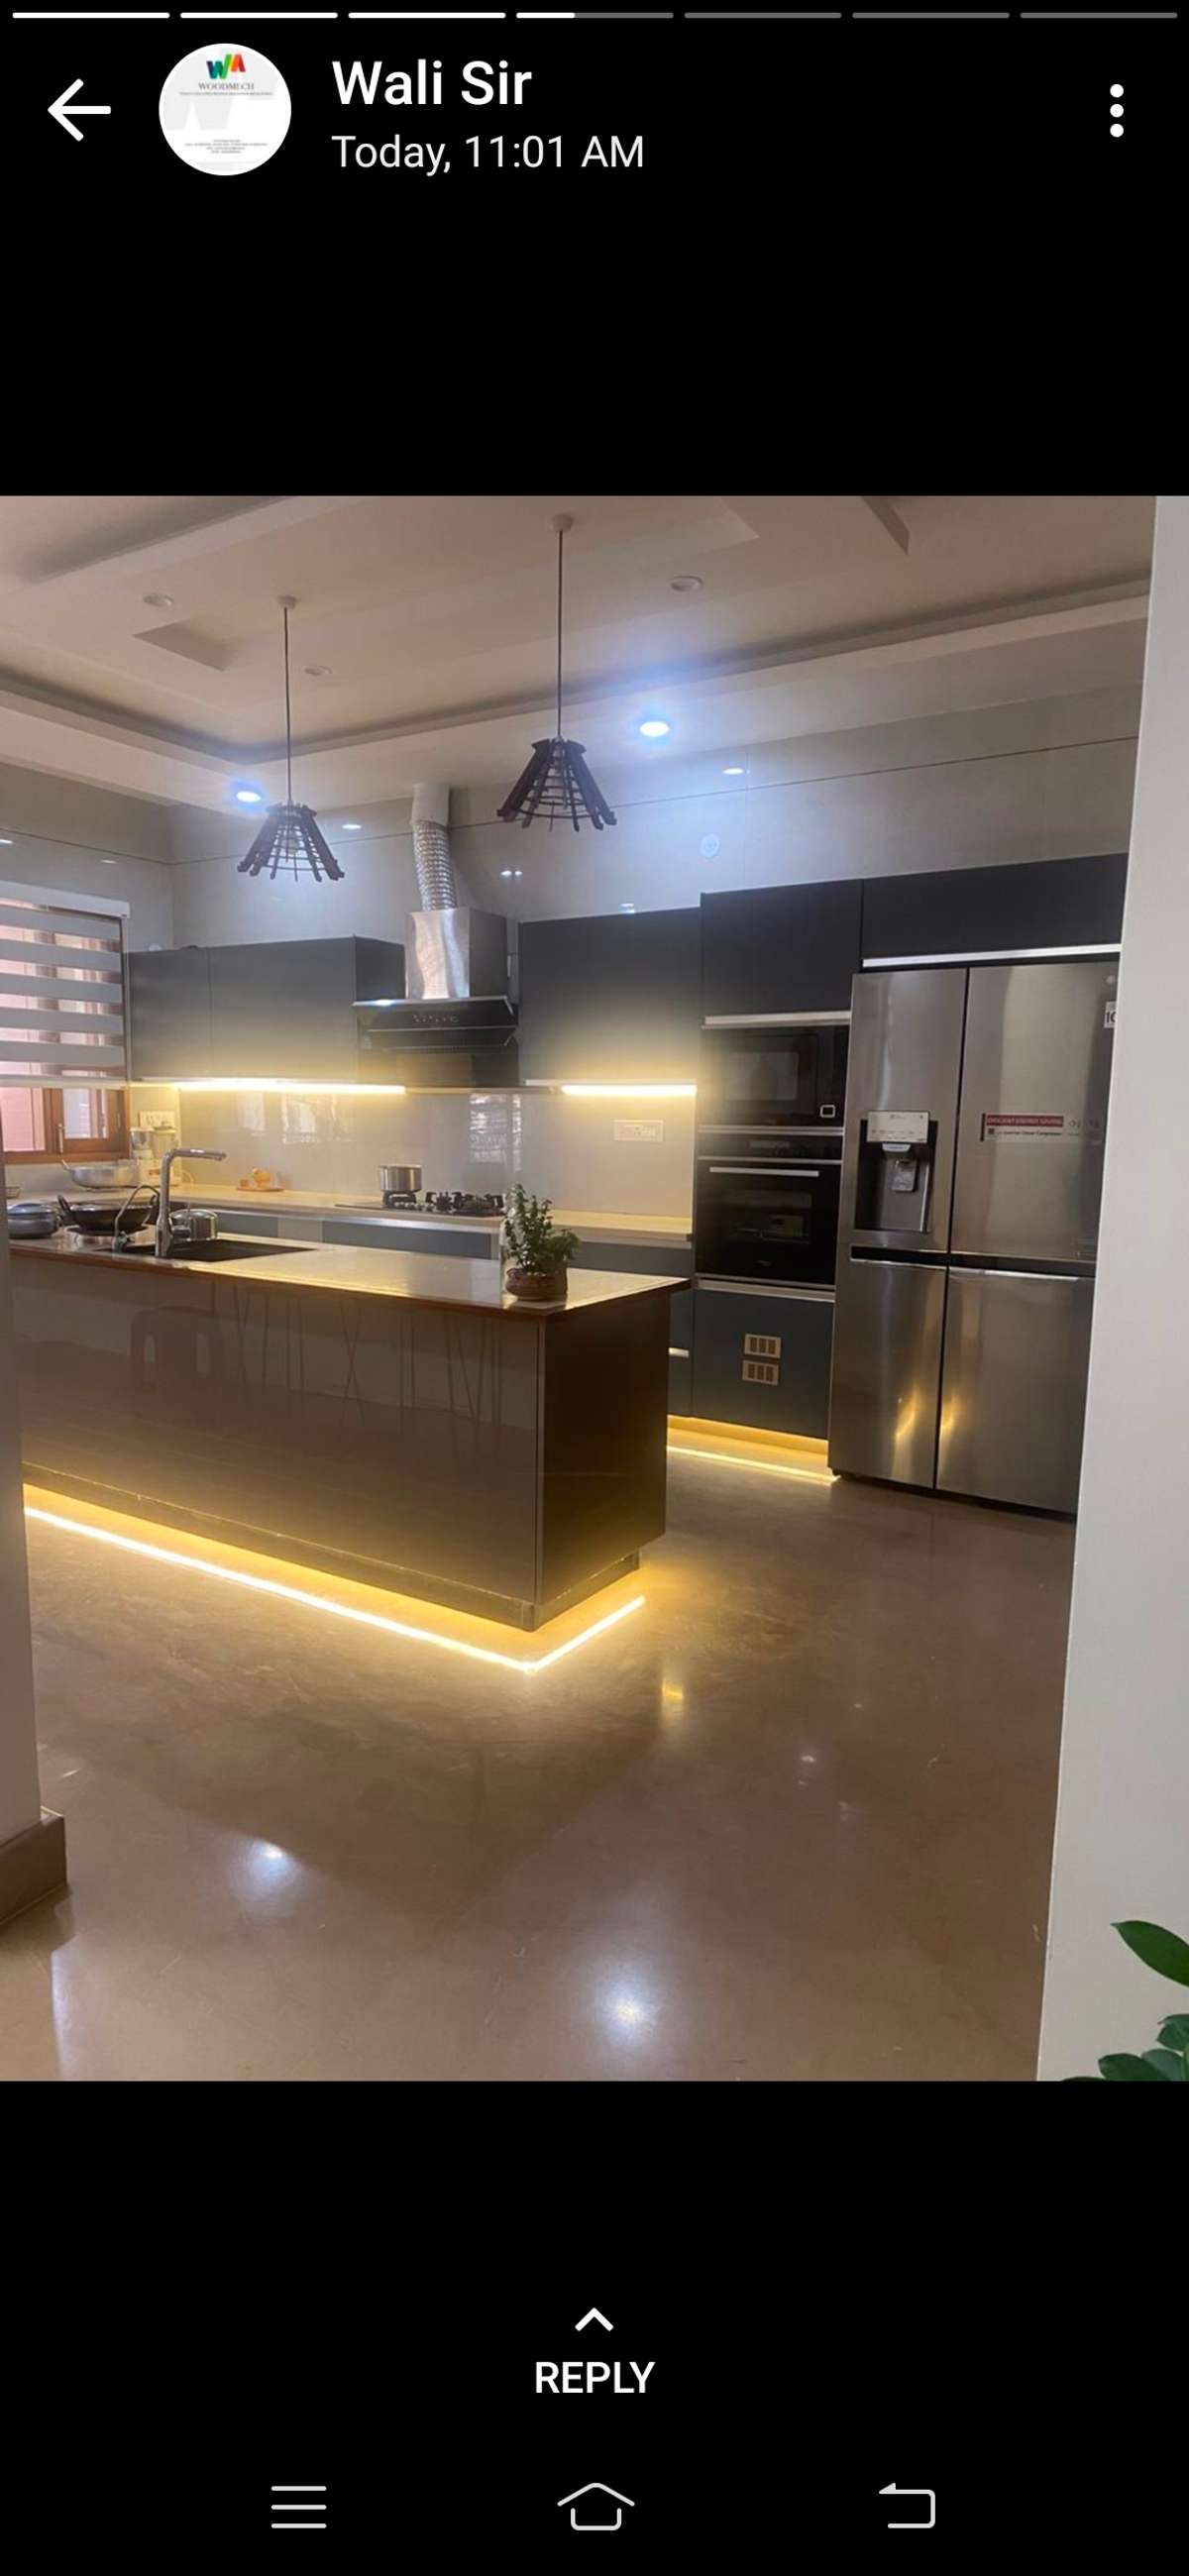 sir bottam light me led strip with liner profile ka use kro see this image in kitchens